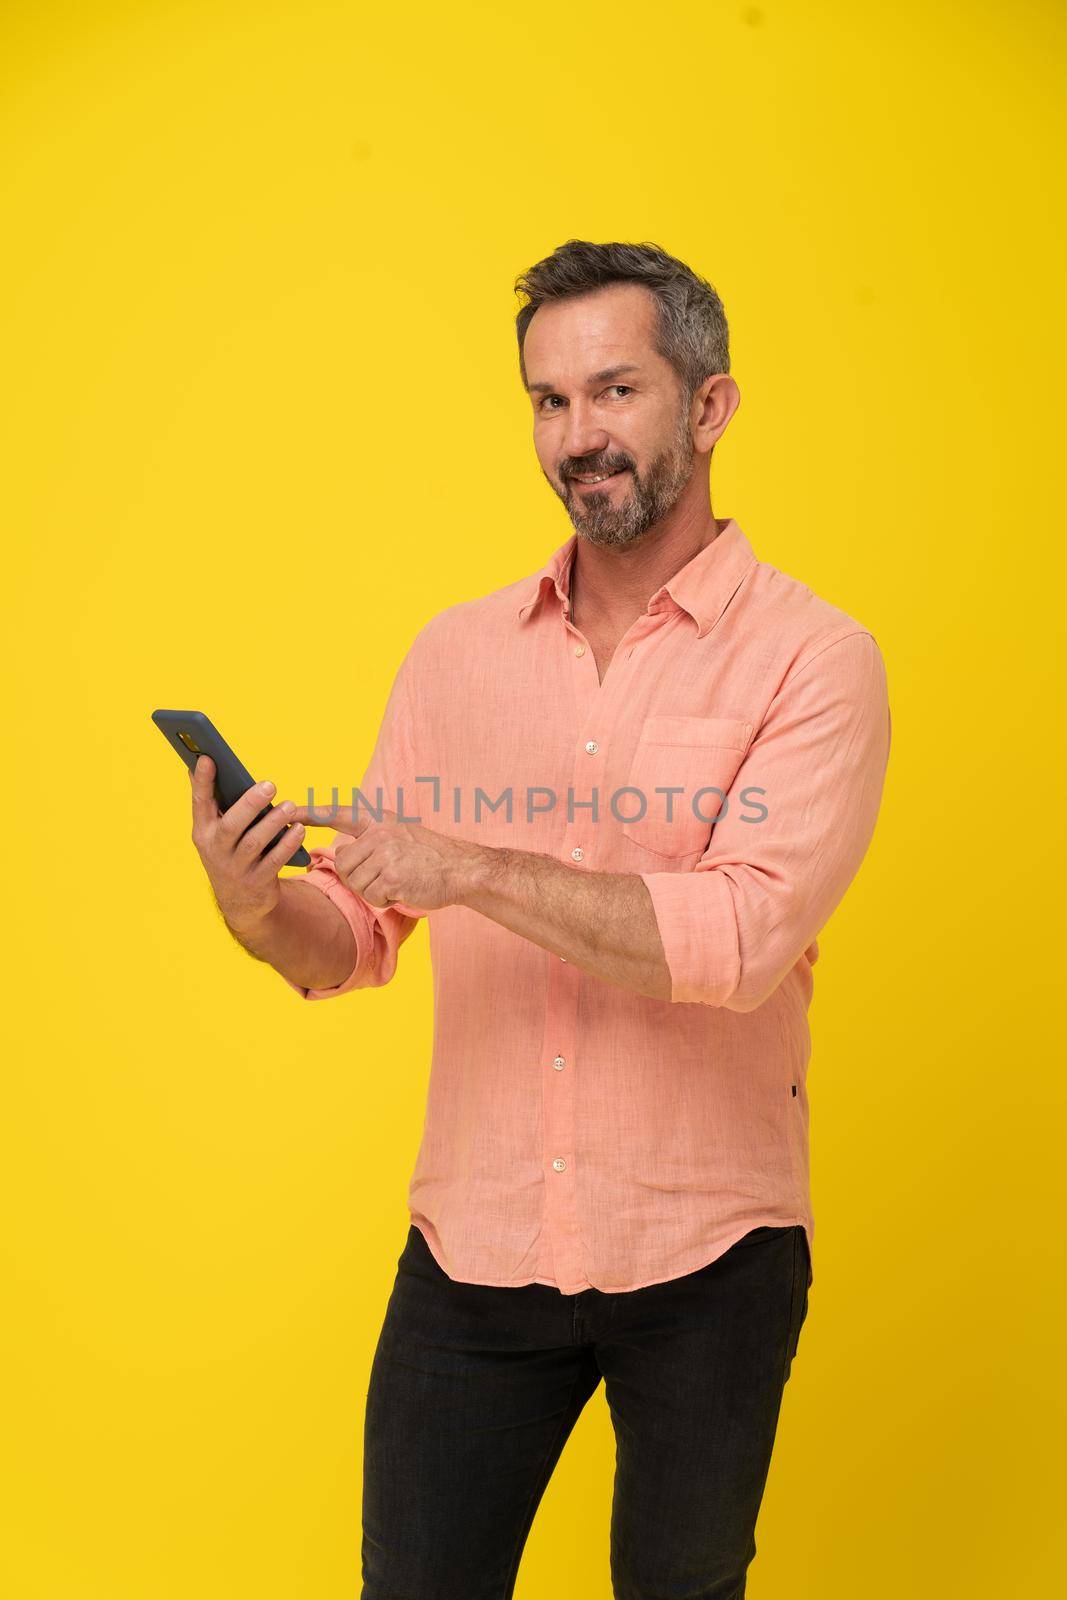 Grey haired man with smartphone in hand happy smiling on camera wearing peach shirt and black jeans isolated on yellow background. Mature fit man with smartphone.